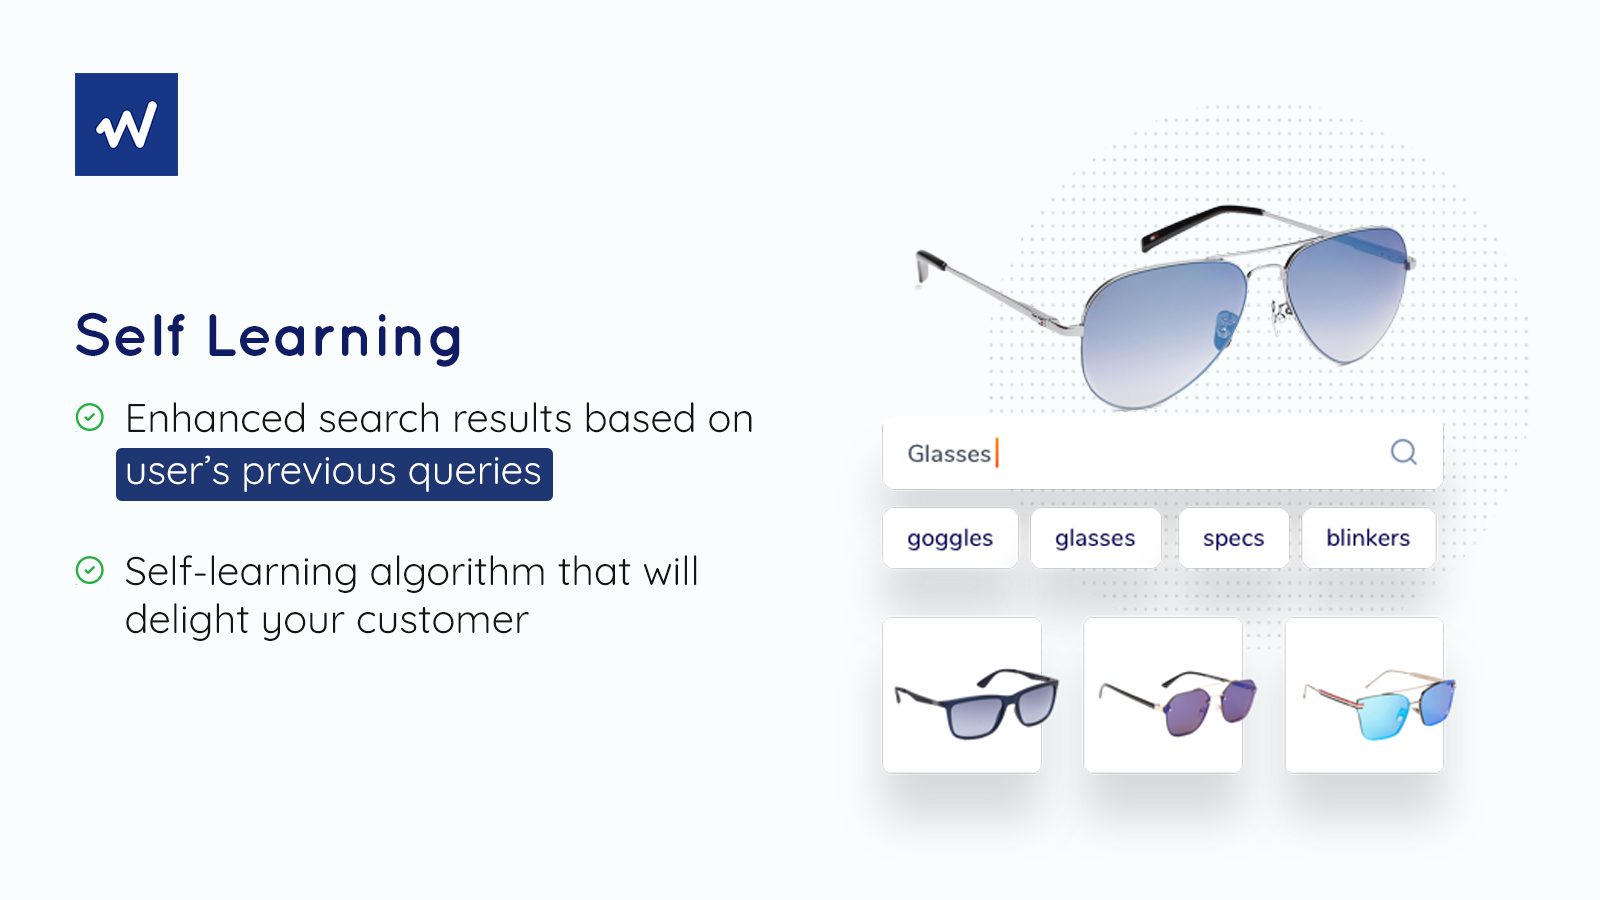 Self Learning - Search experience get improved automatically.